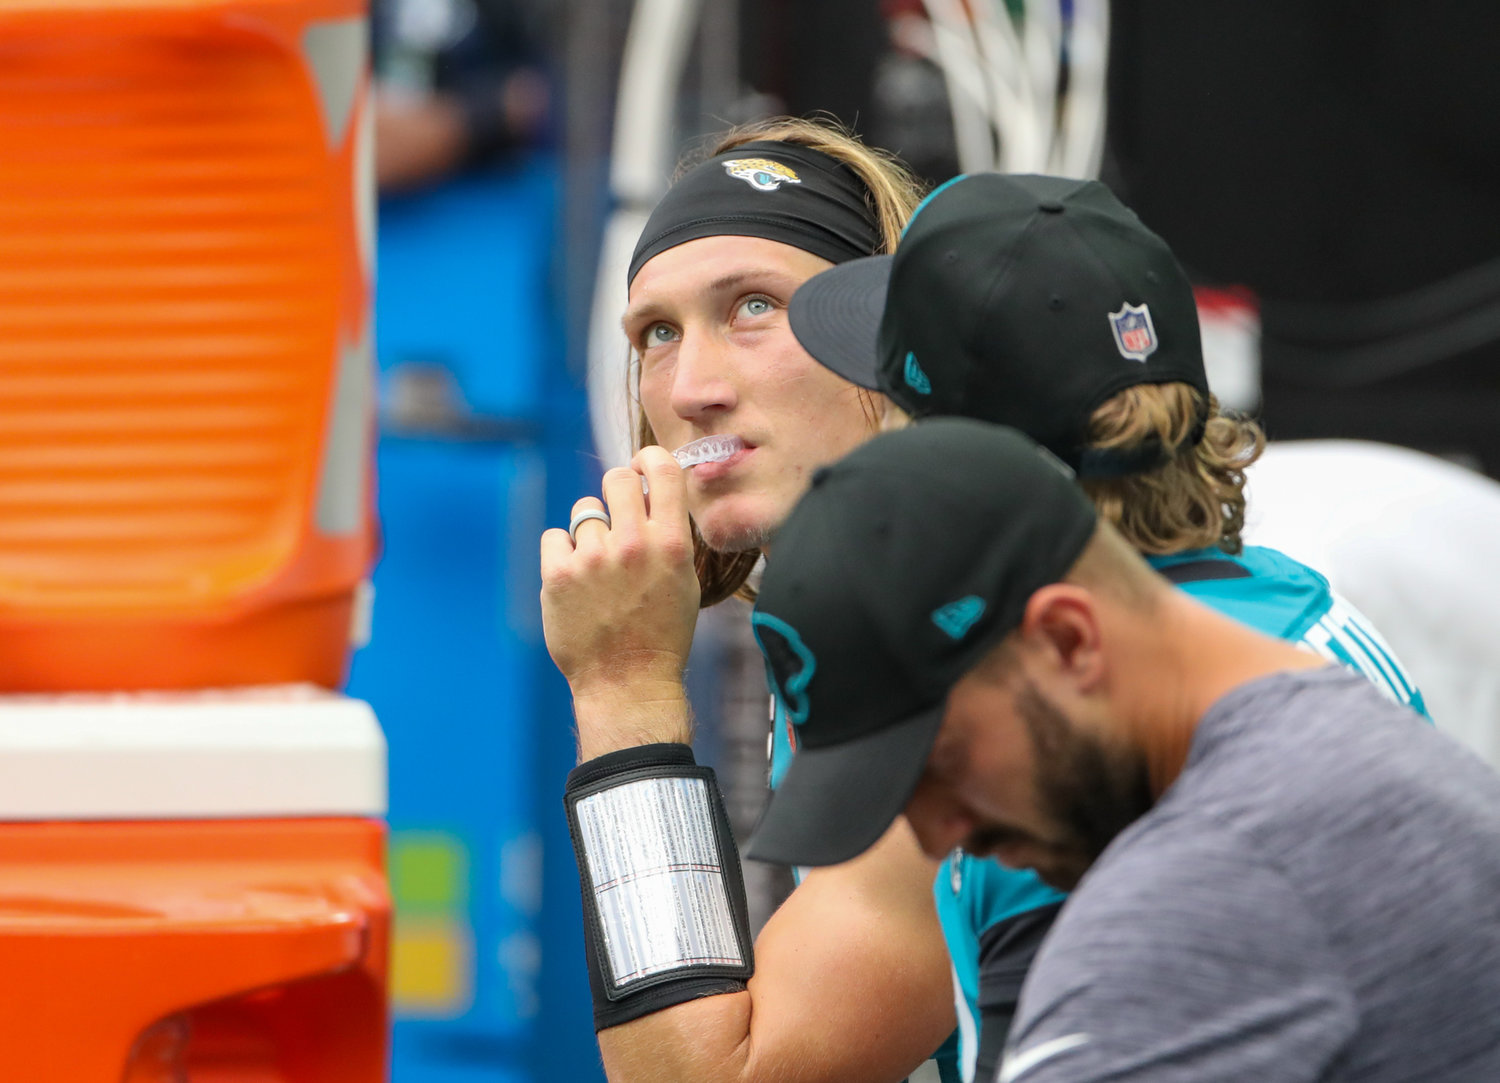 Jacksonville Jaguars quarterback Trevor Lawrence (16) looks up at the video board after throwing an interception during the first half of an NFL game between the Houston Texans and the Jacksonville Jaguars on September 12, 2021 in Houston, Texas.